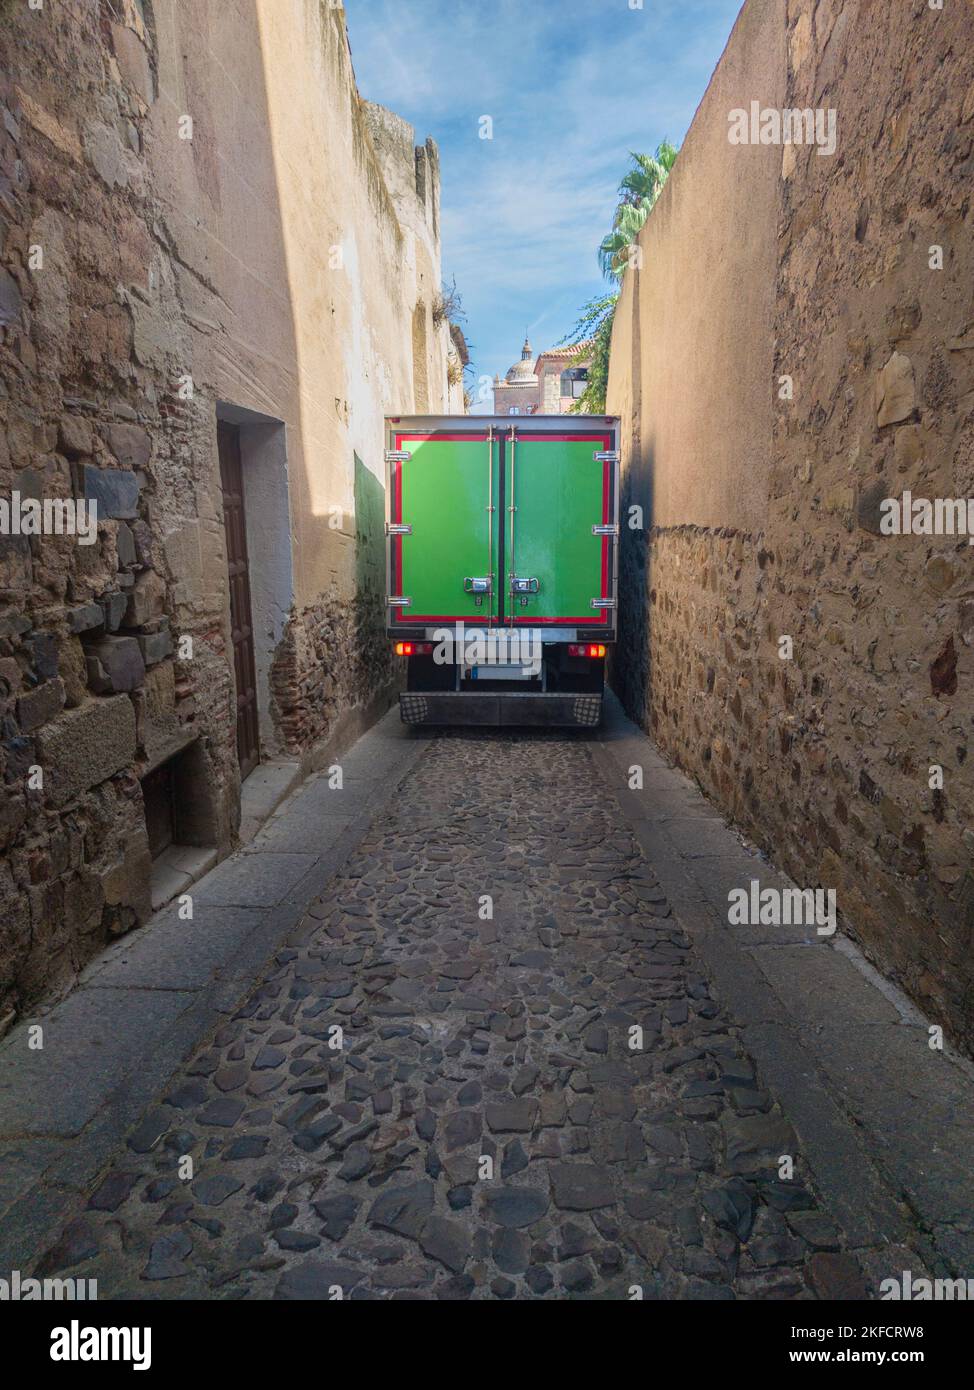 Semi-trailer truck driving carefully through a narrow street at downtown. Deliveries at old town concept Stock Photo